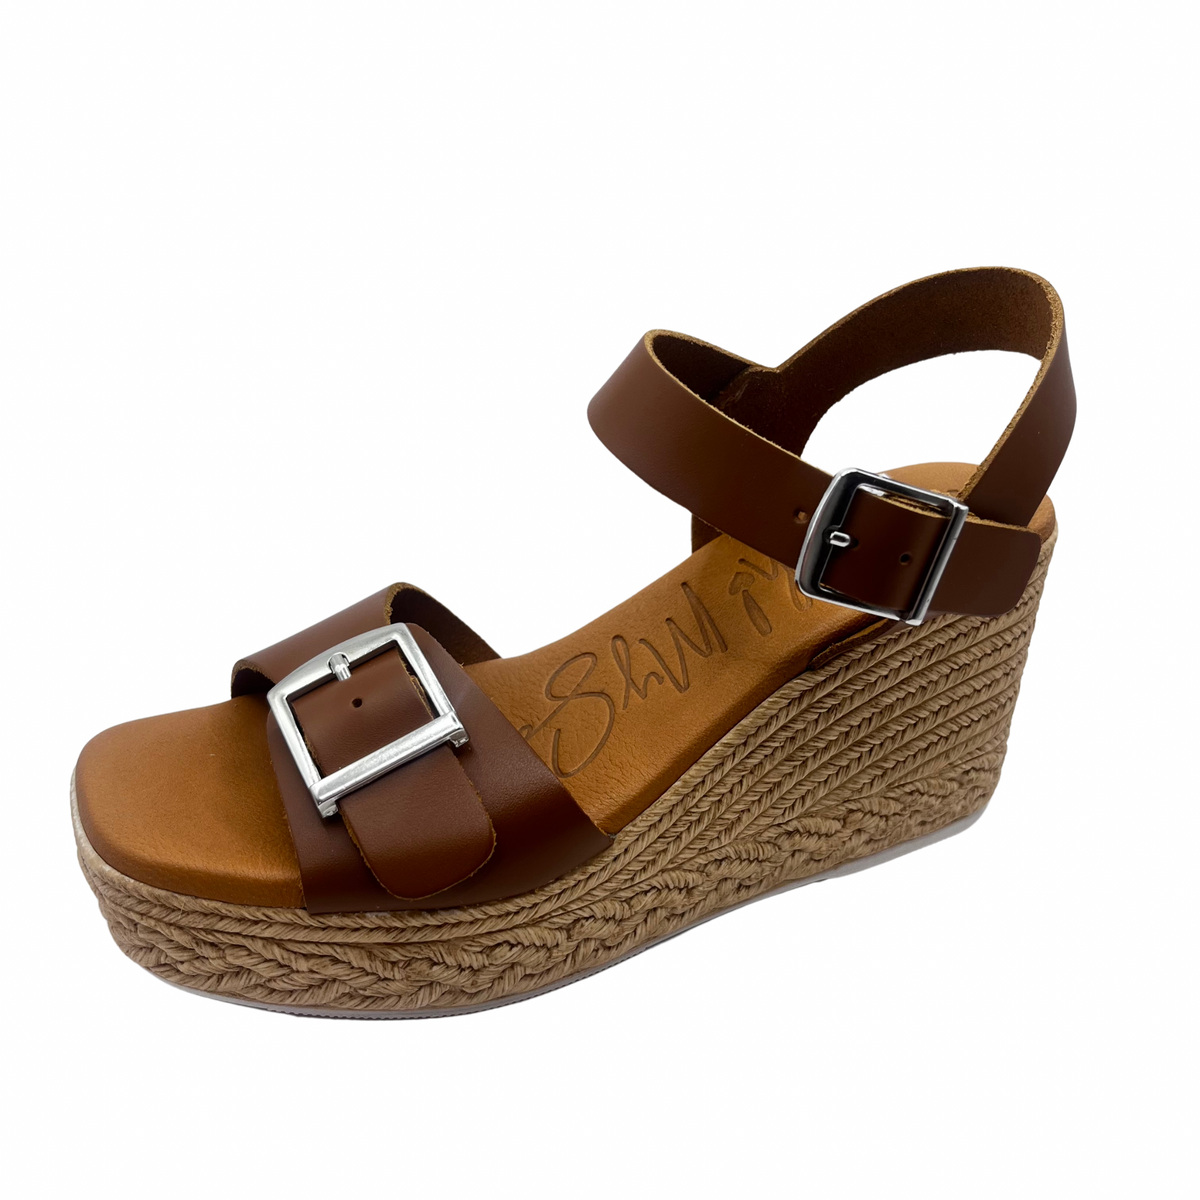 Oh My Sandals Woven Wedge Brown Leather Sandal